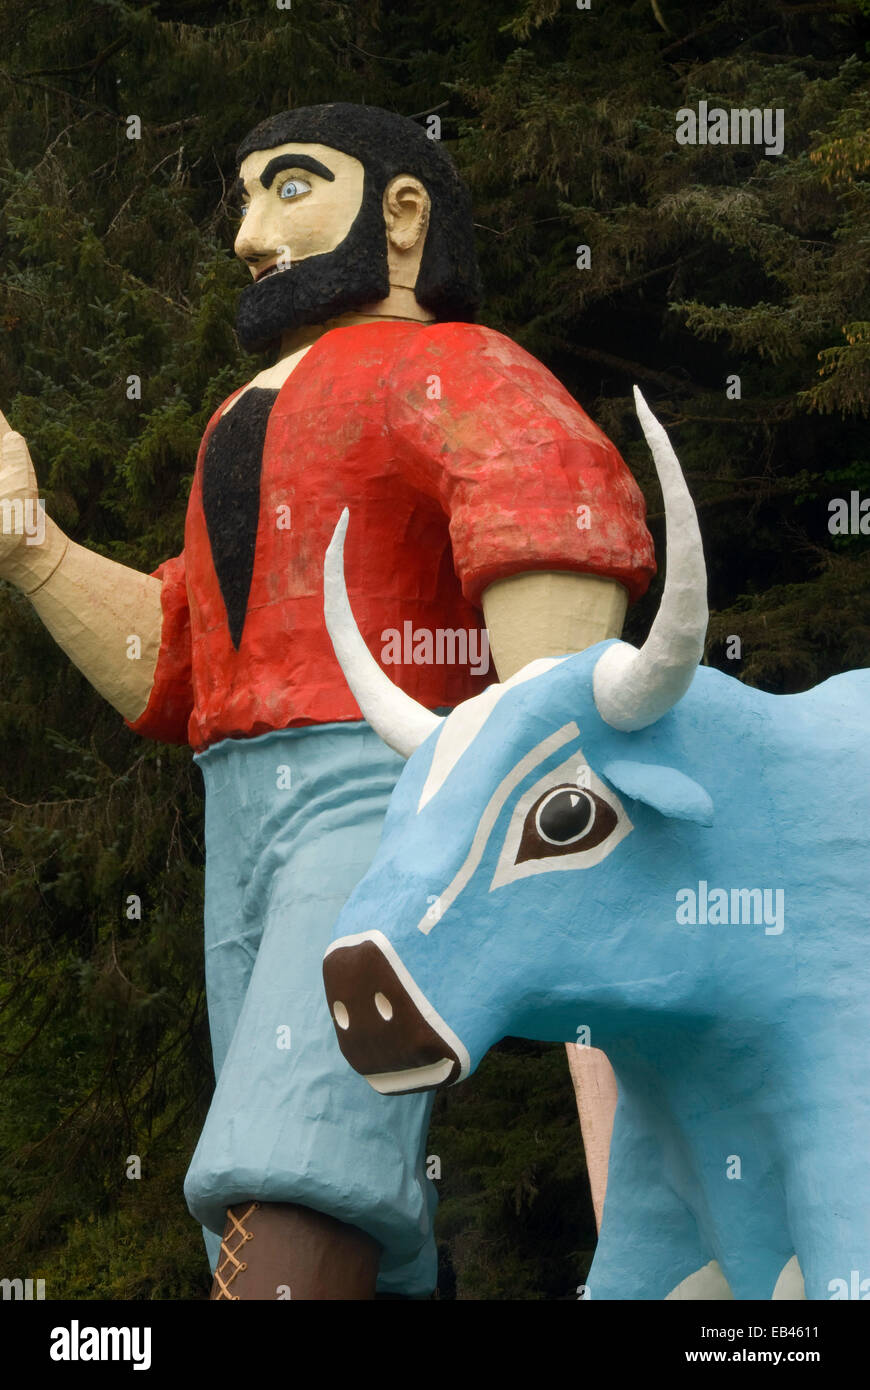 Paul Bunyan and Babe statues, Trees of Mystery, California Stock Photo